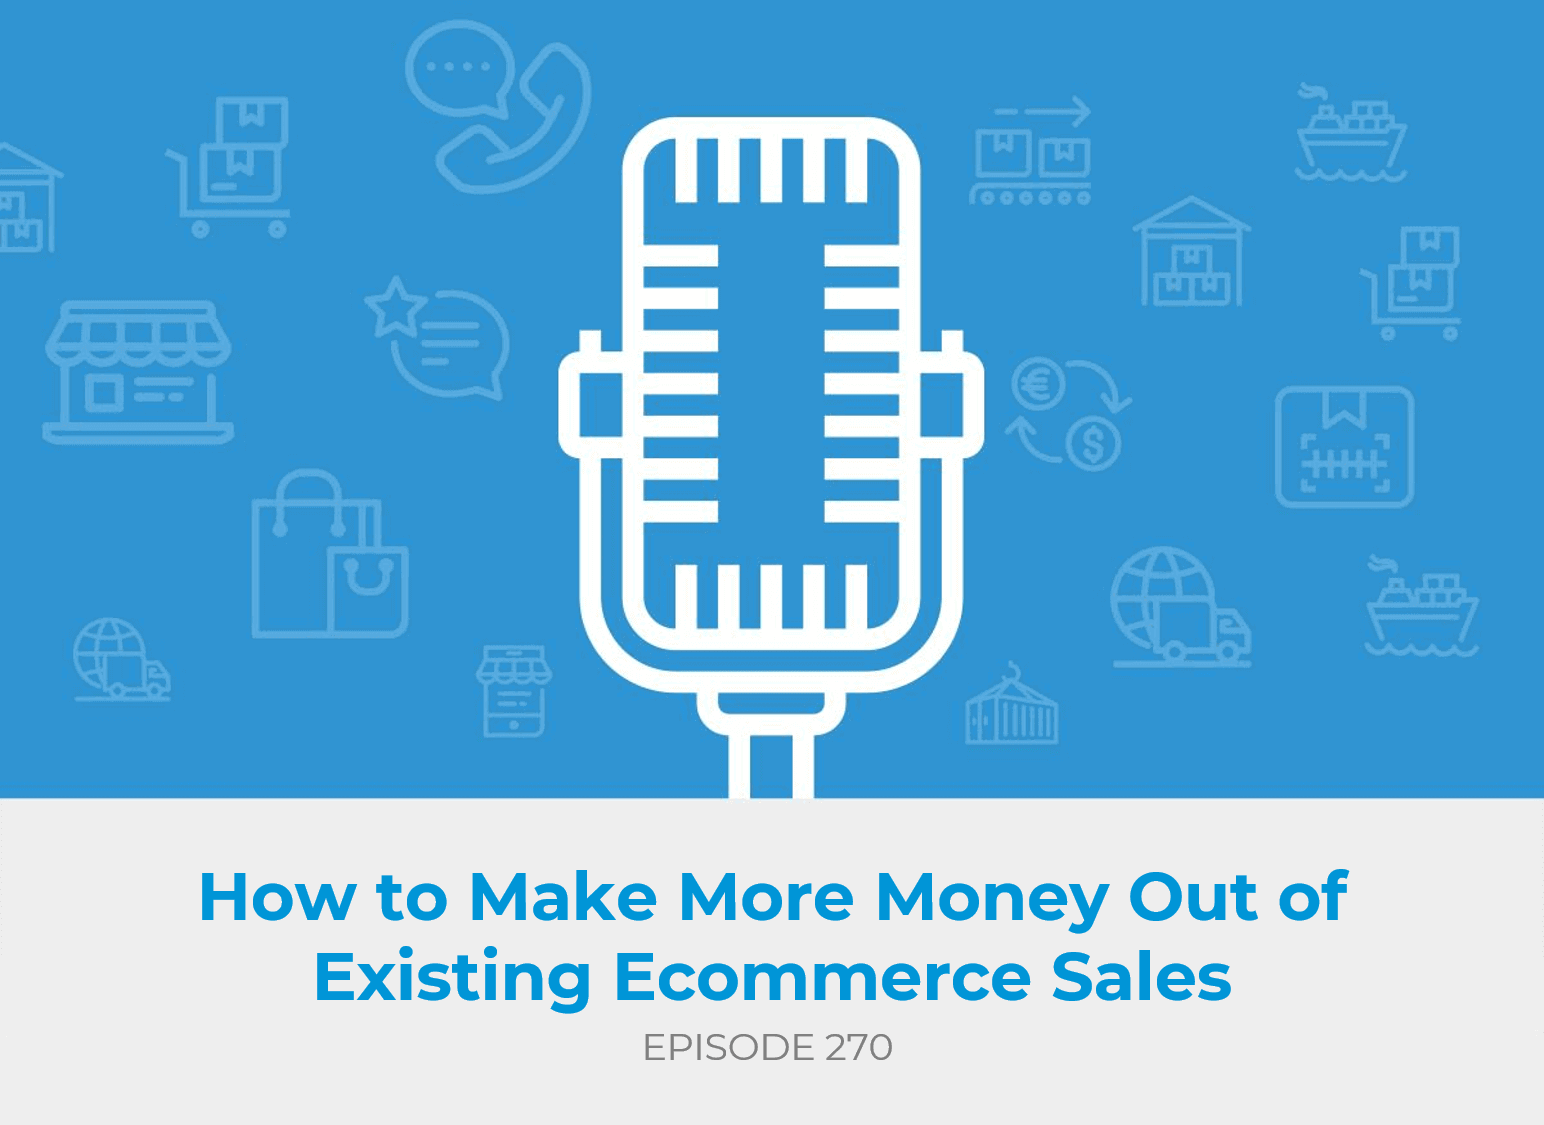 How to Make More Money Out of Existing Ecommerce Sales